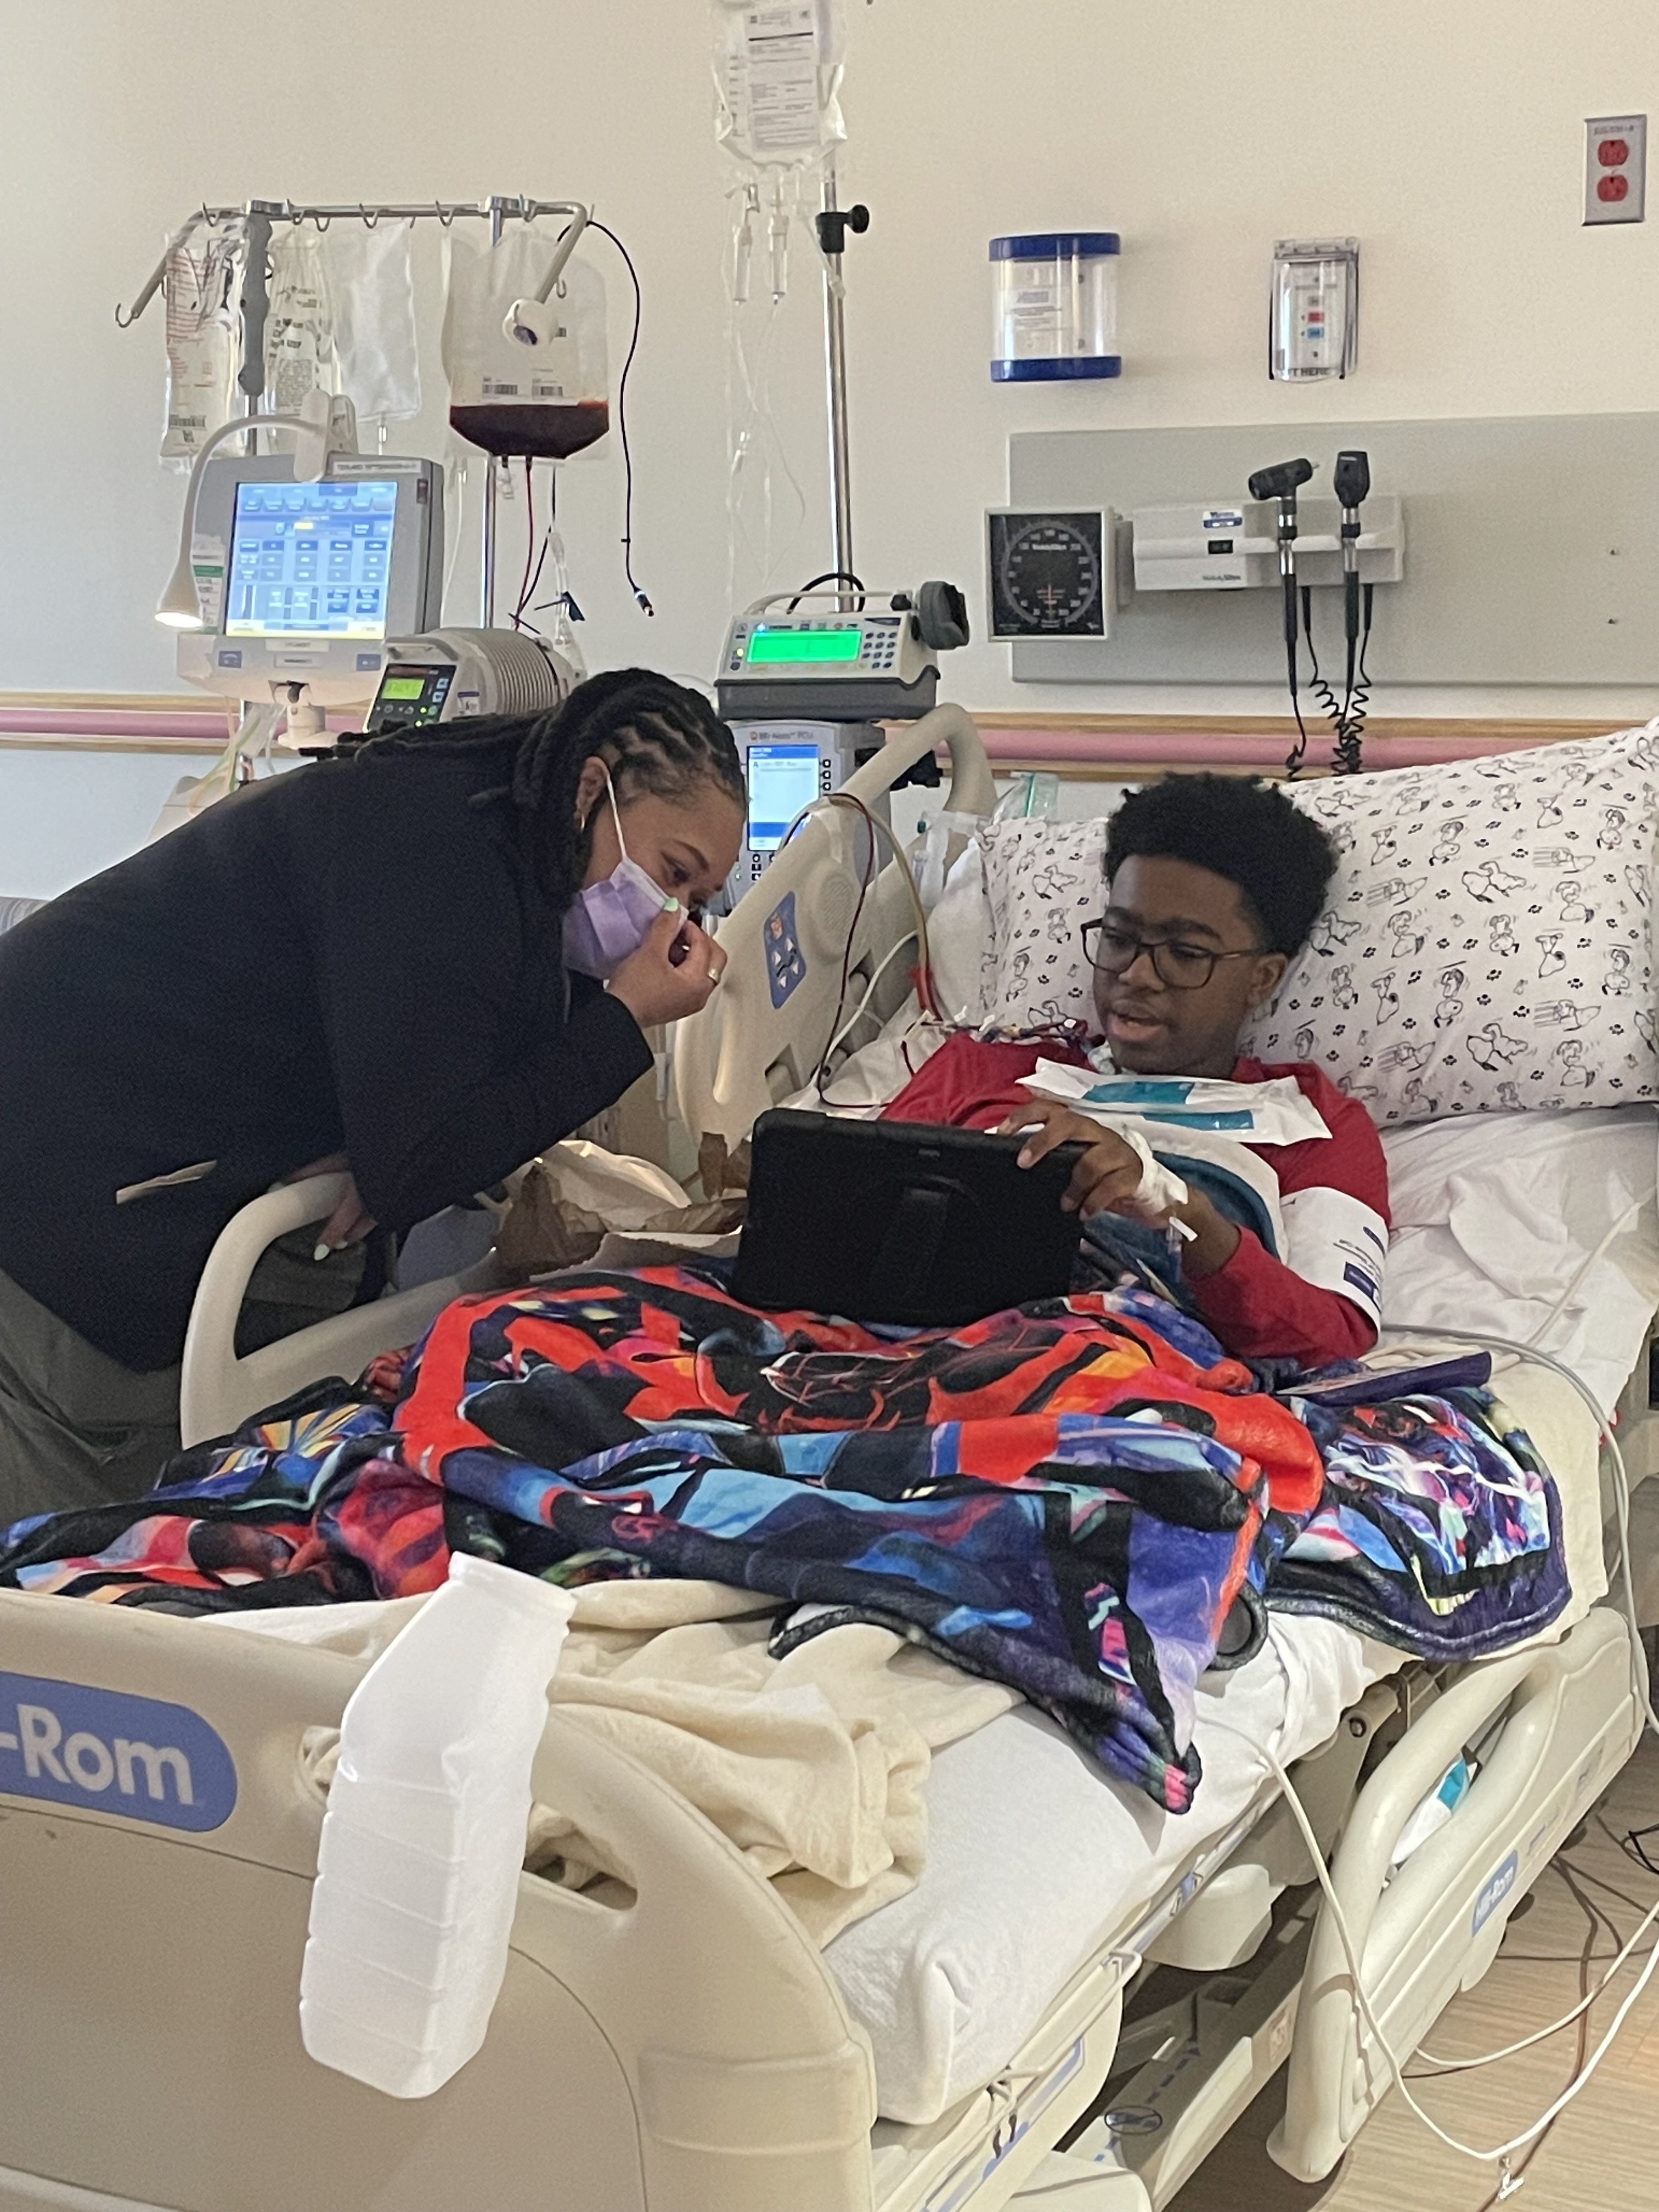  Kendric, a 12-year-old boy from the Washington, D.C., area, is the first patient in the world with sickle cell disease to begin a gene therapy that may cure his condition